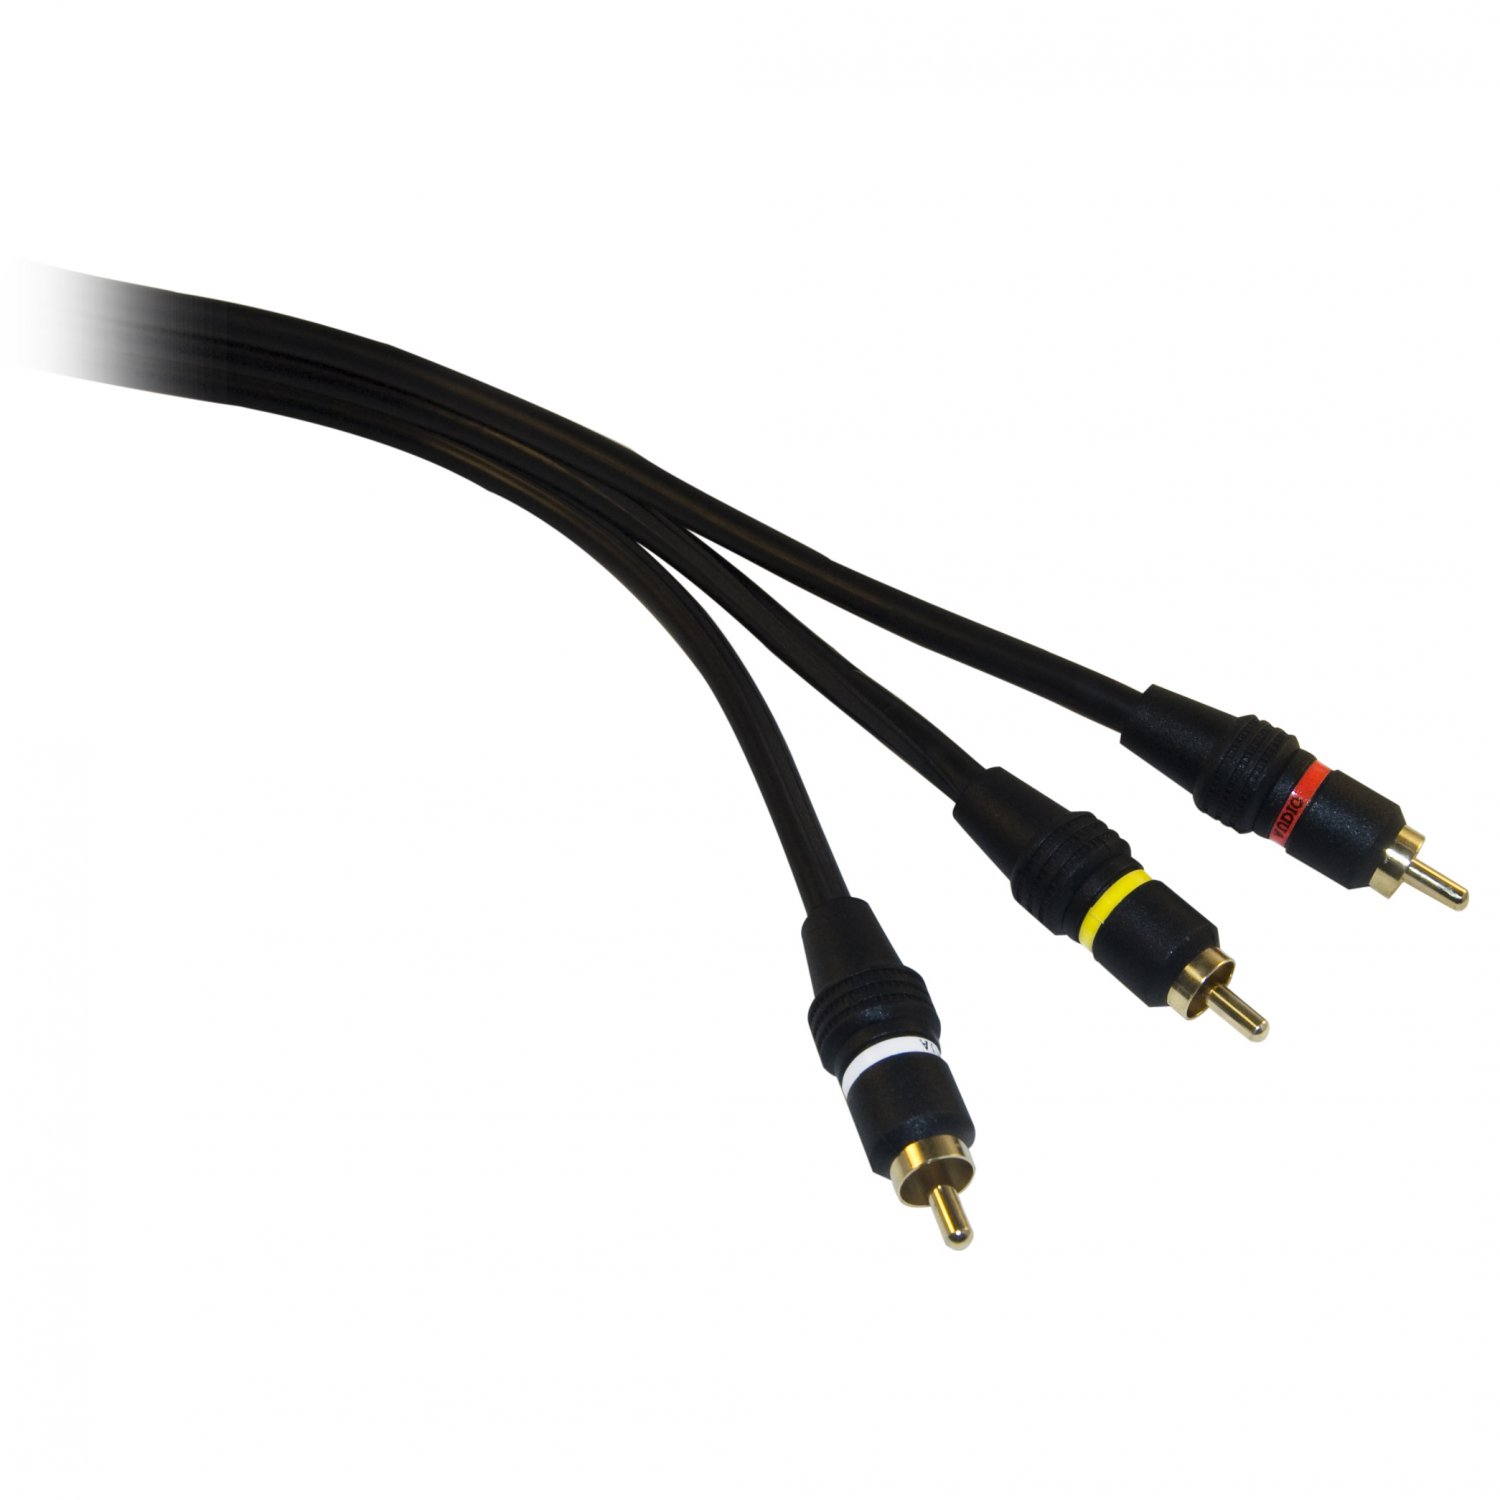 12ft High Quality RCA Audio / Video Cable, 3 RCA Male 10R2-03112